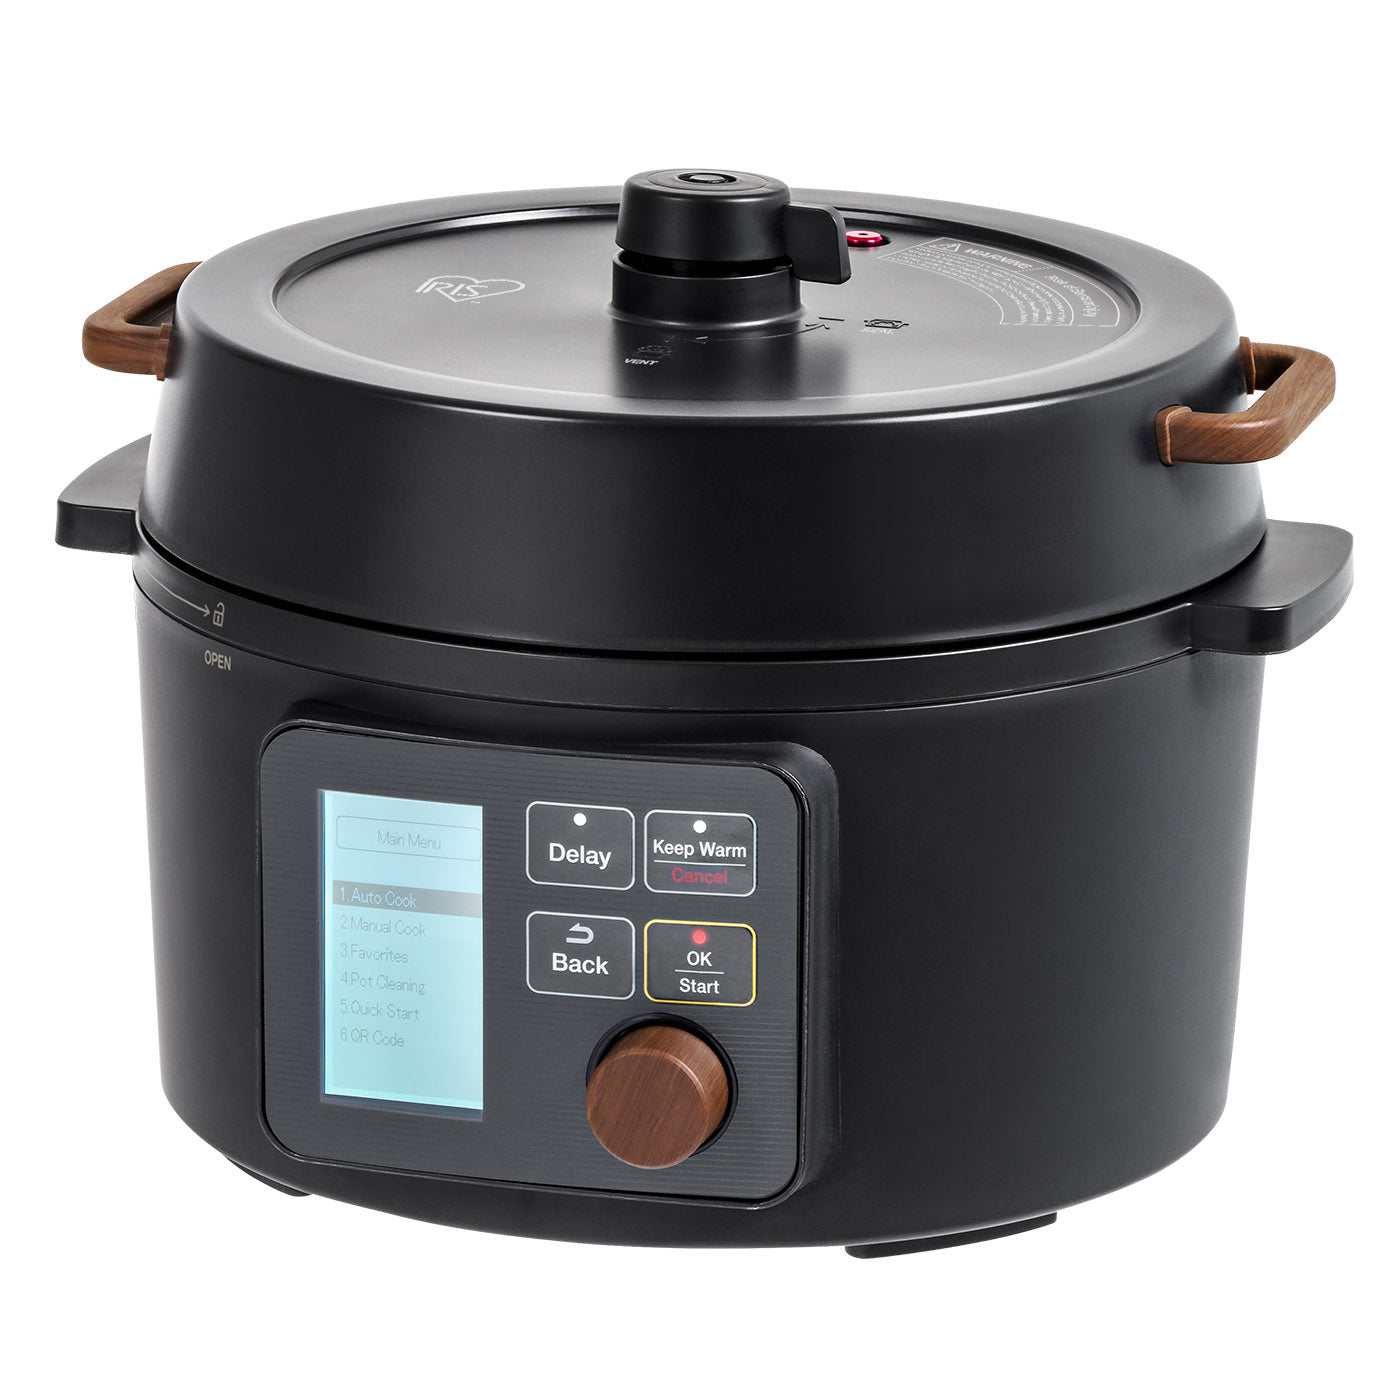 Multifunction Pressure Cooker with Waterless Cooking